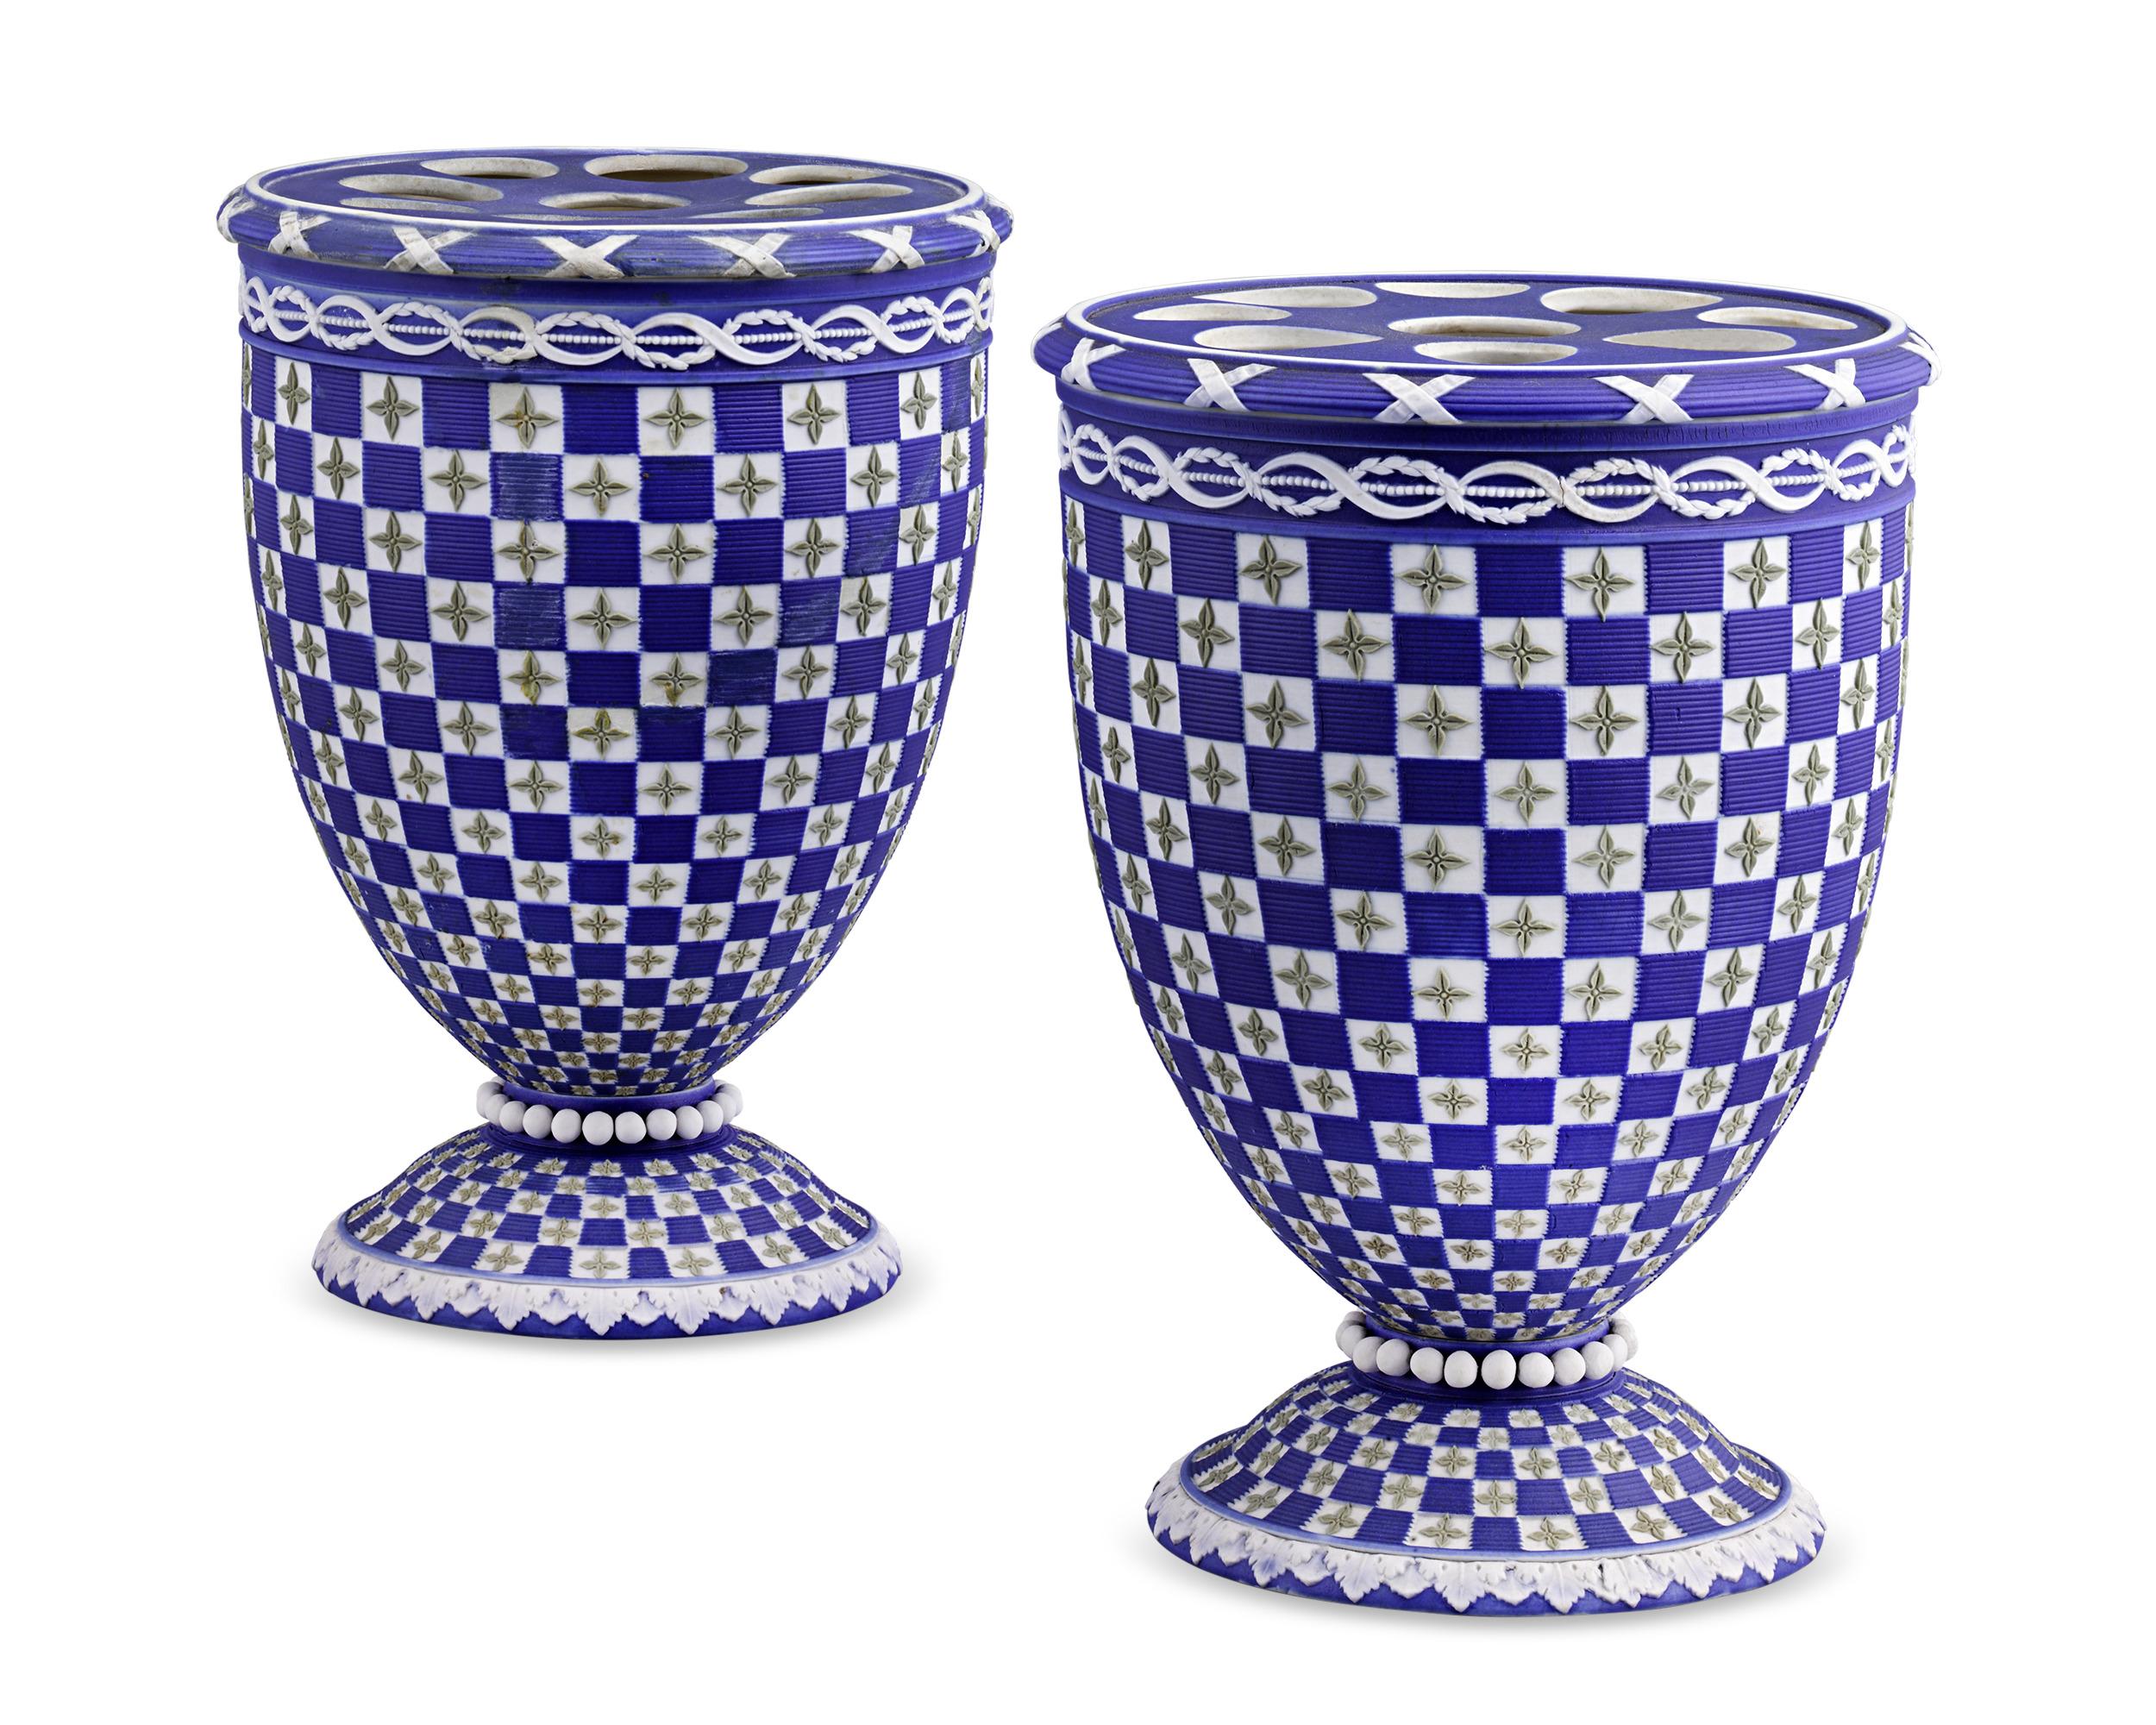 Crafted by Wedgwood, this pair of tricolor bough pots features a graphic design in the famed English porcelain firm’s highly desirable and rare diceware motif. Sage green quatrefoil stars against white porcelain squares alternate with brilliant blue